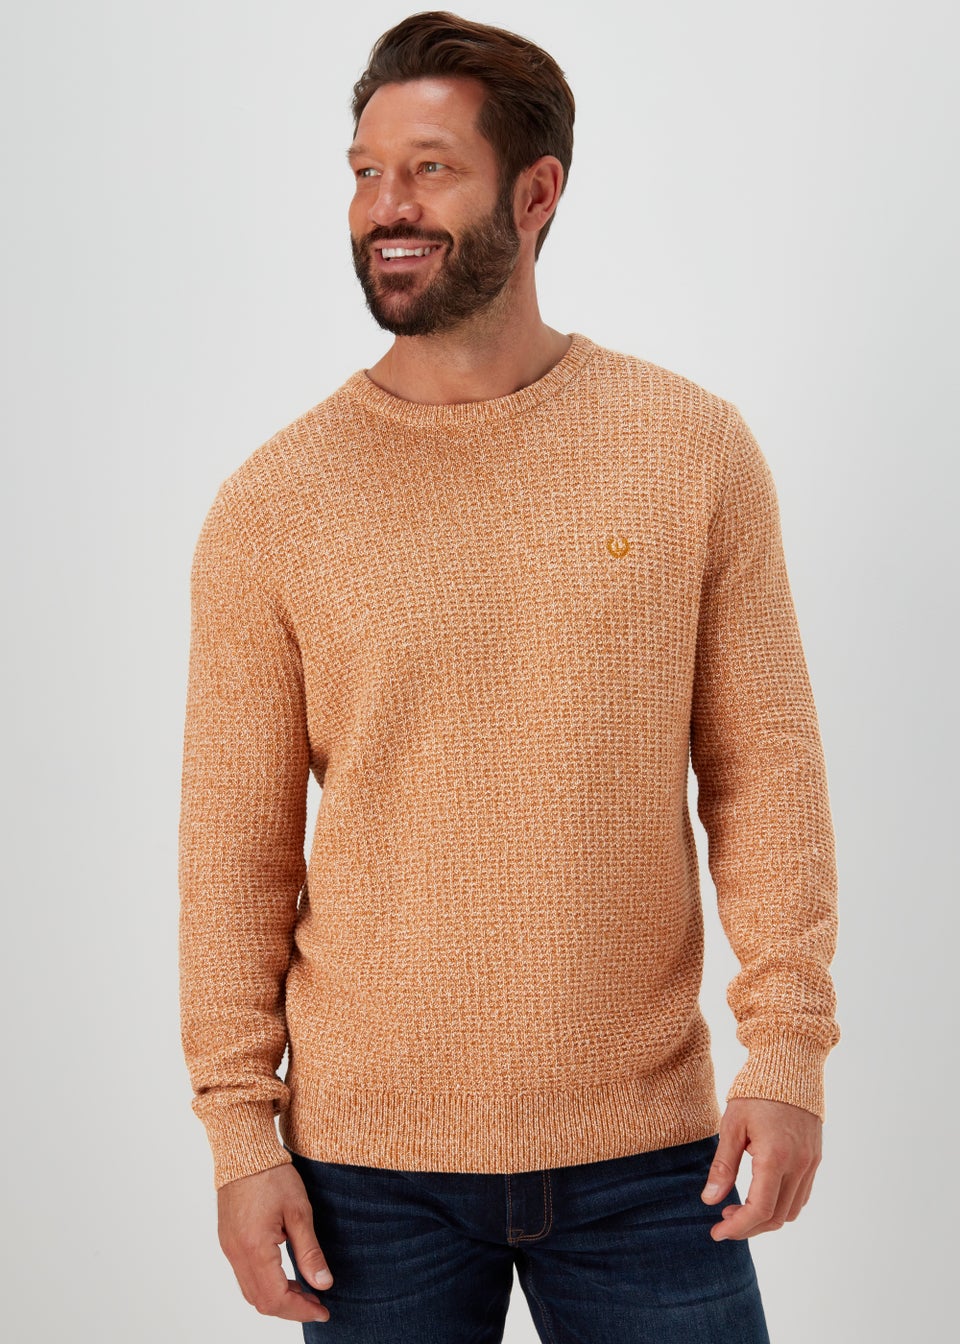 Lincoln Toffee & Ecru Knitted Jumper